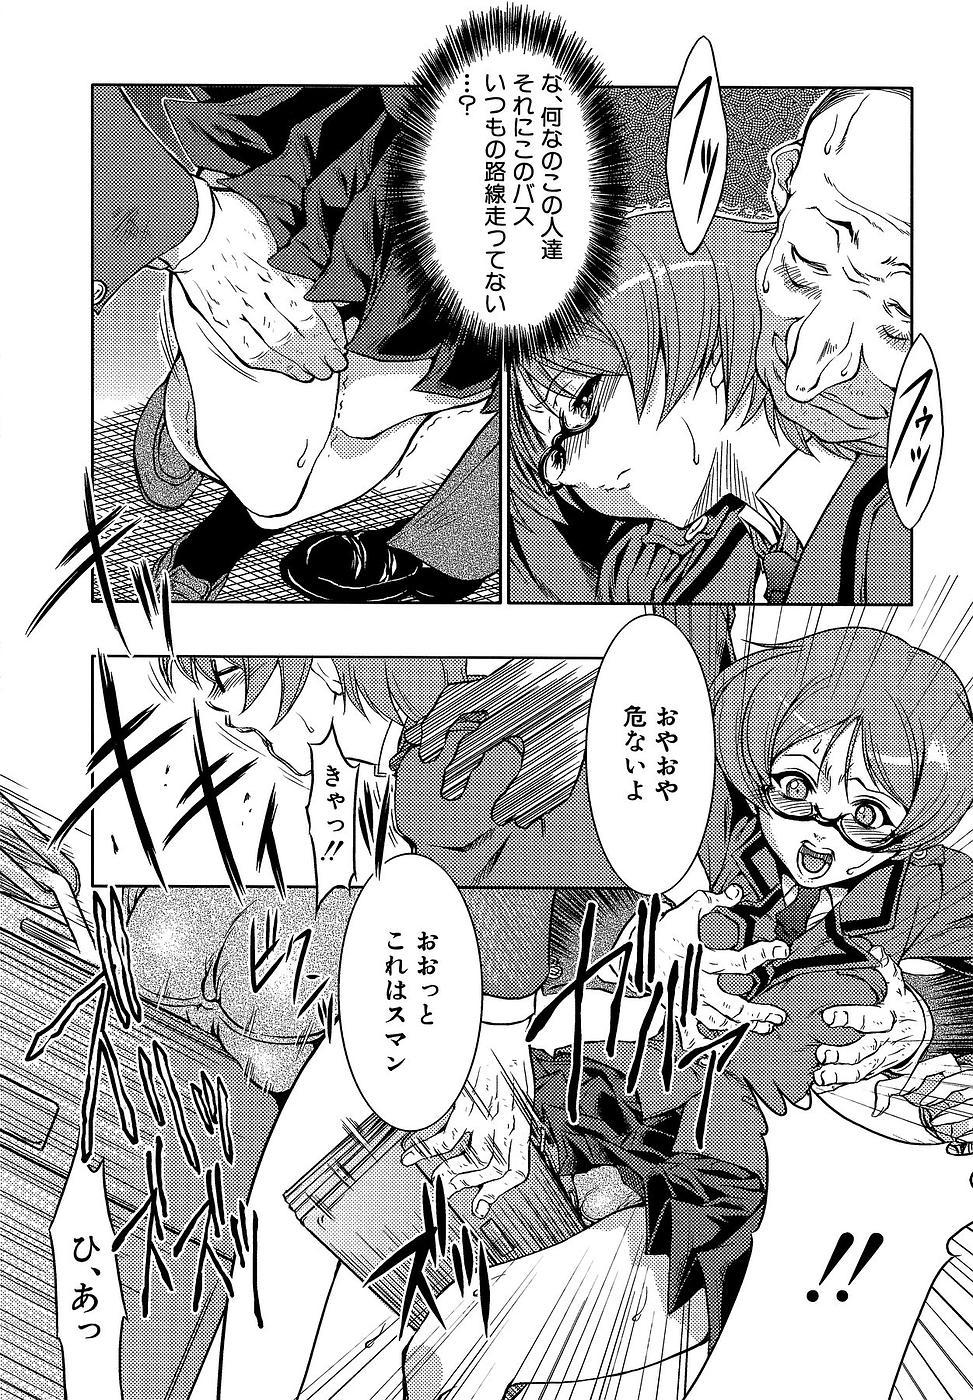 Chacal Genzairyou: Megane Musume Pica - Page 8